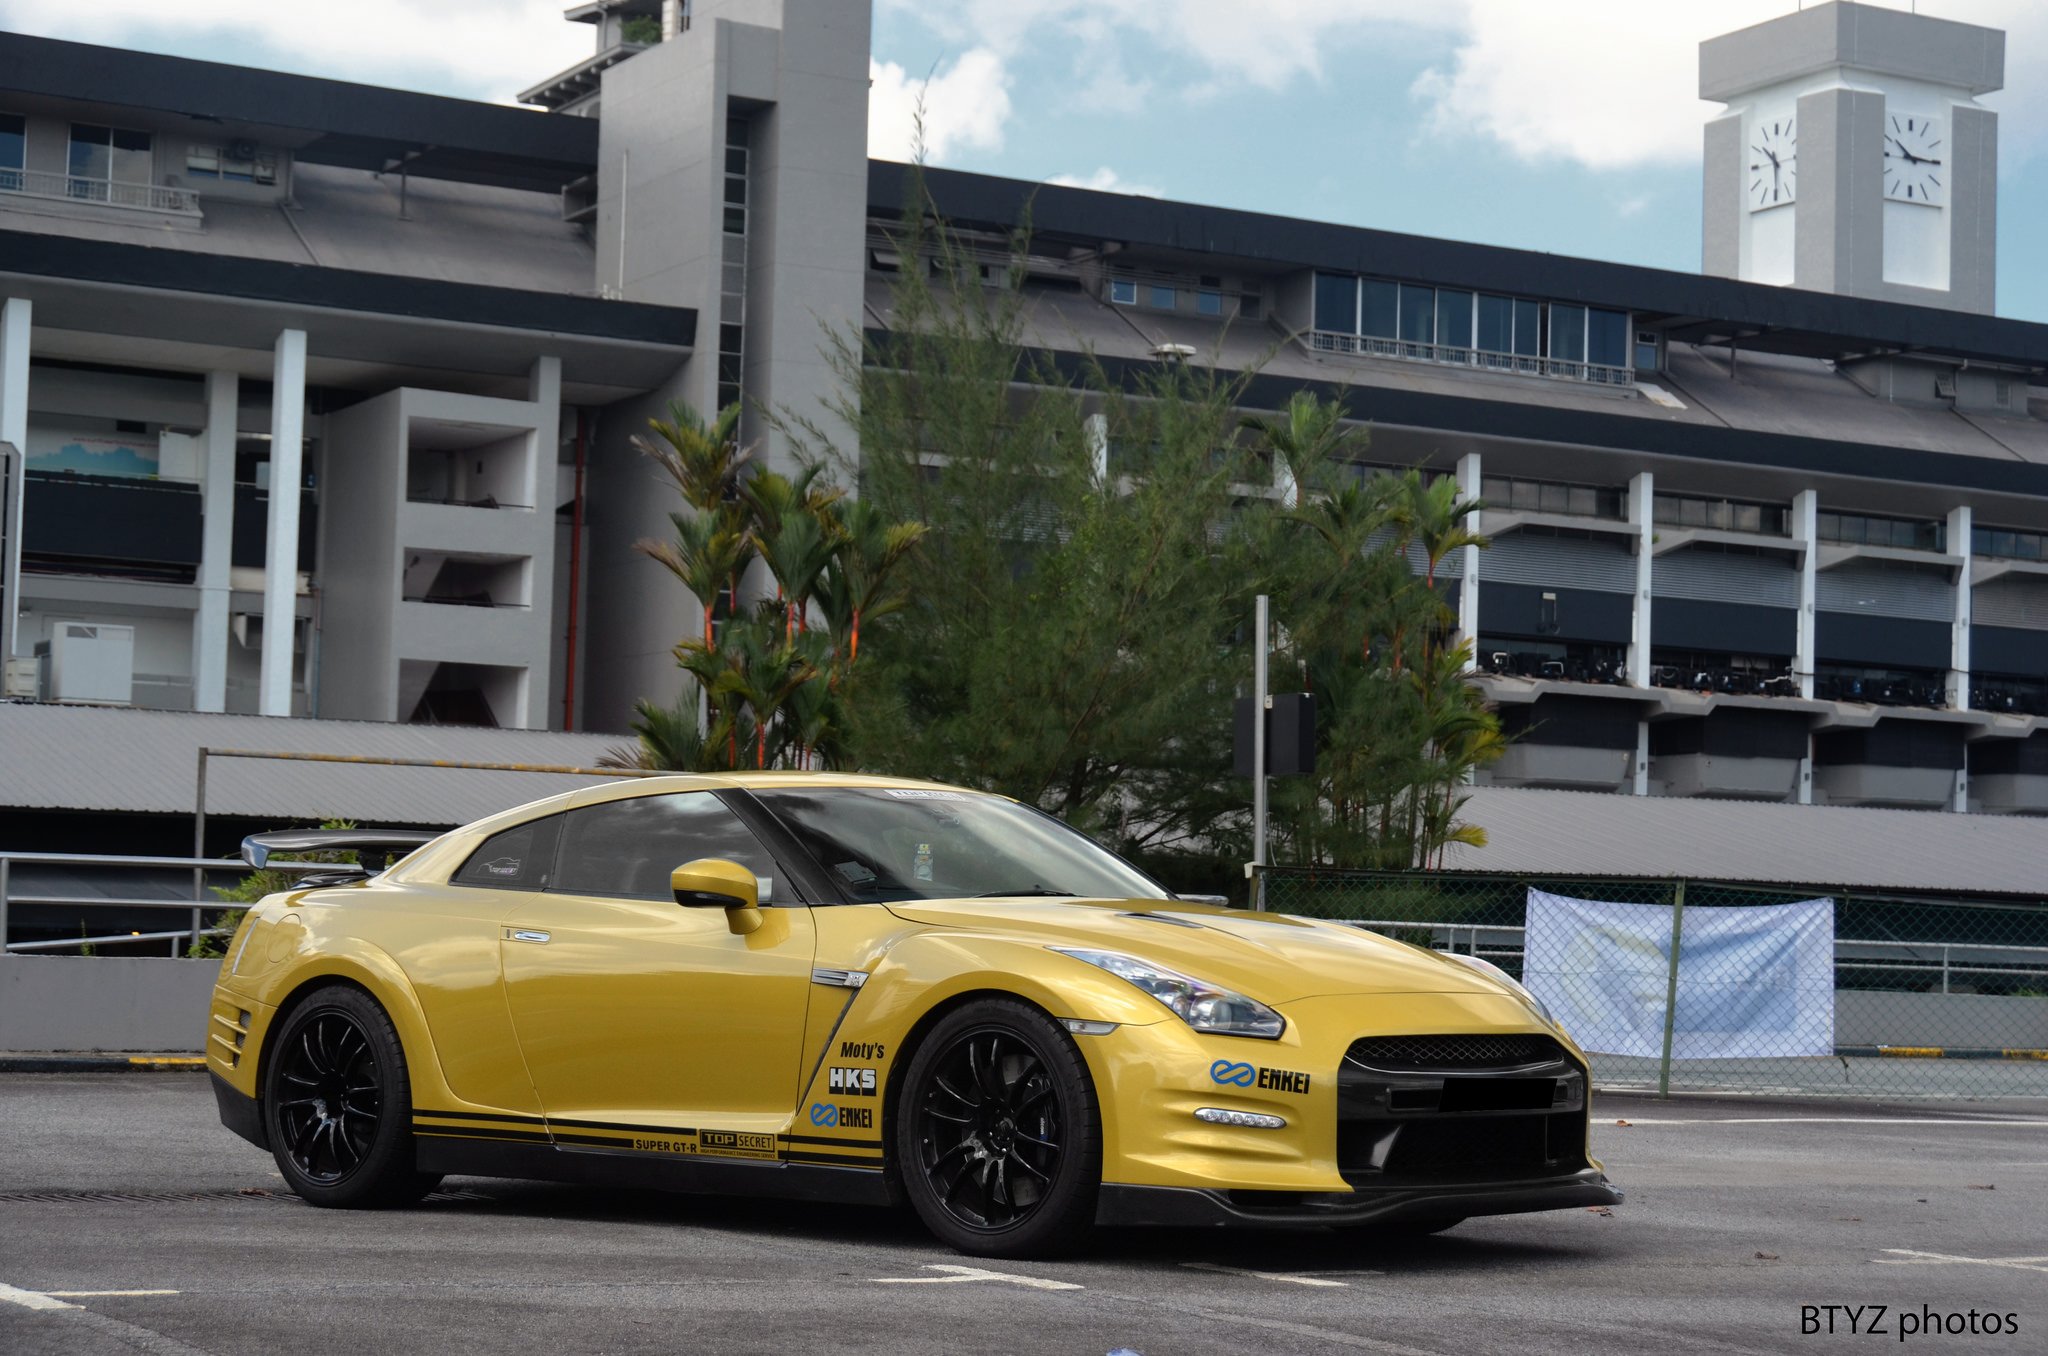 gt r, Nismo, Nissan, R35, Tuning, Supercar, Coupe, Japan, Cars Wallpaper